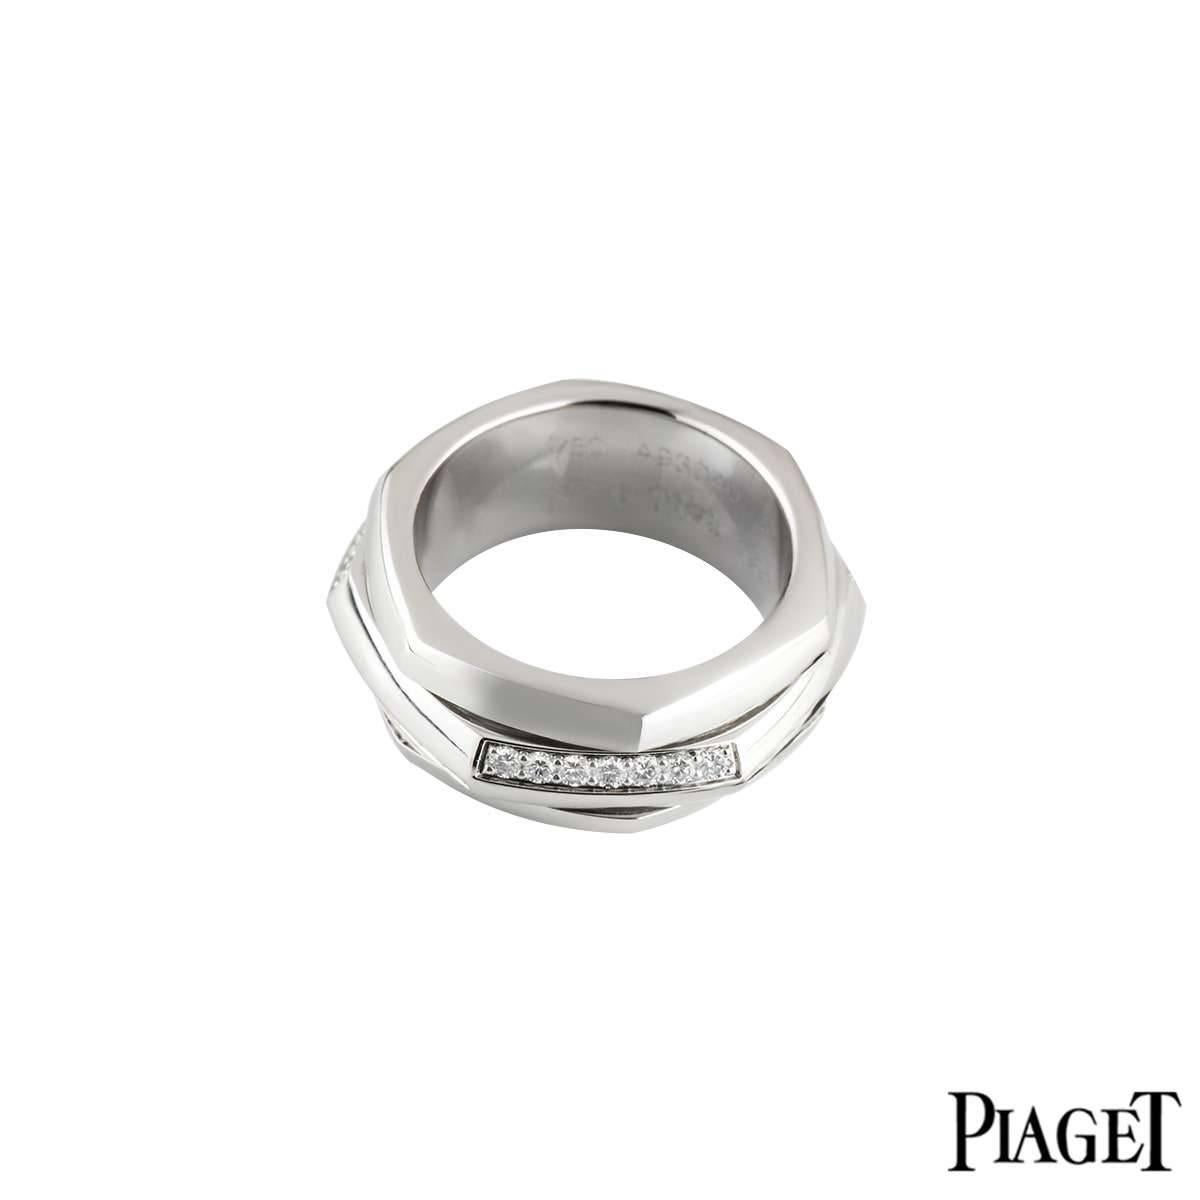 An 18k white gold diamond set Possession ring by Piaget. The ring is of hexagonal design with a spinning centre, complimented with alternating pave set round brilliant cut diamond intersections, totalling approximately 0.65ct. The ring is 9mm in